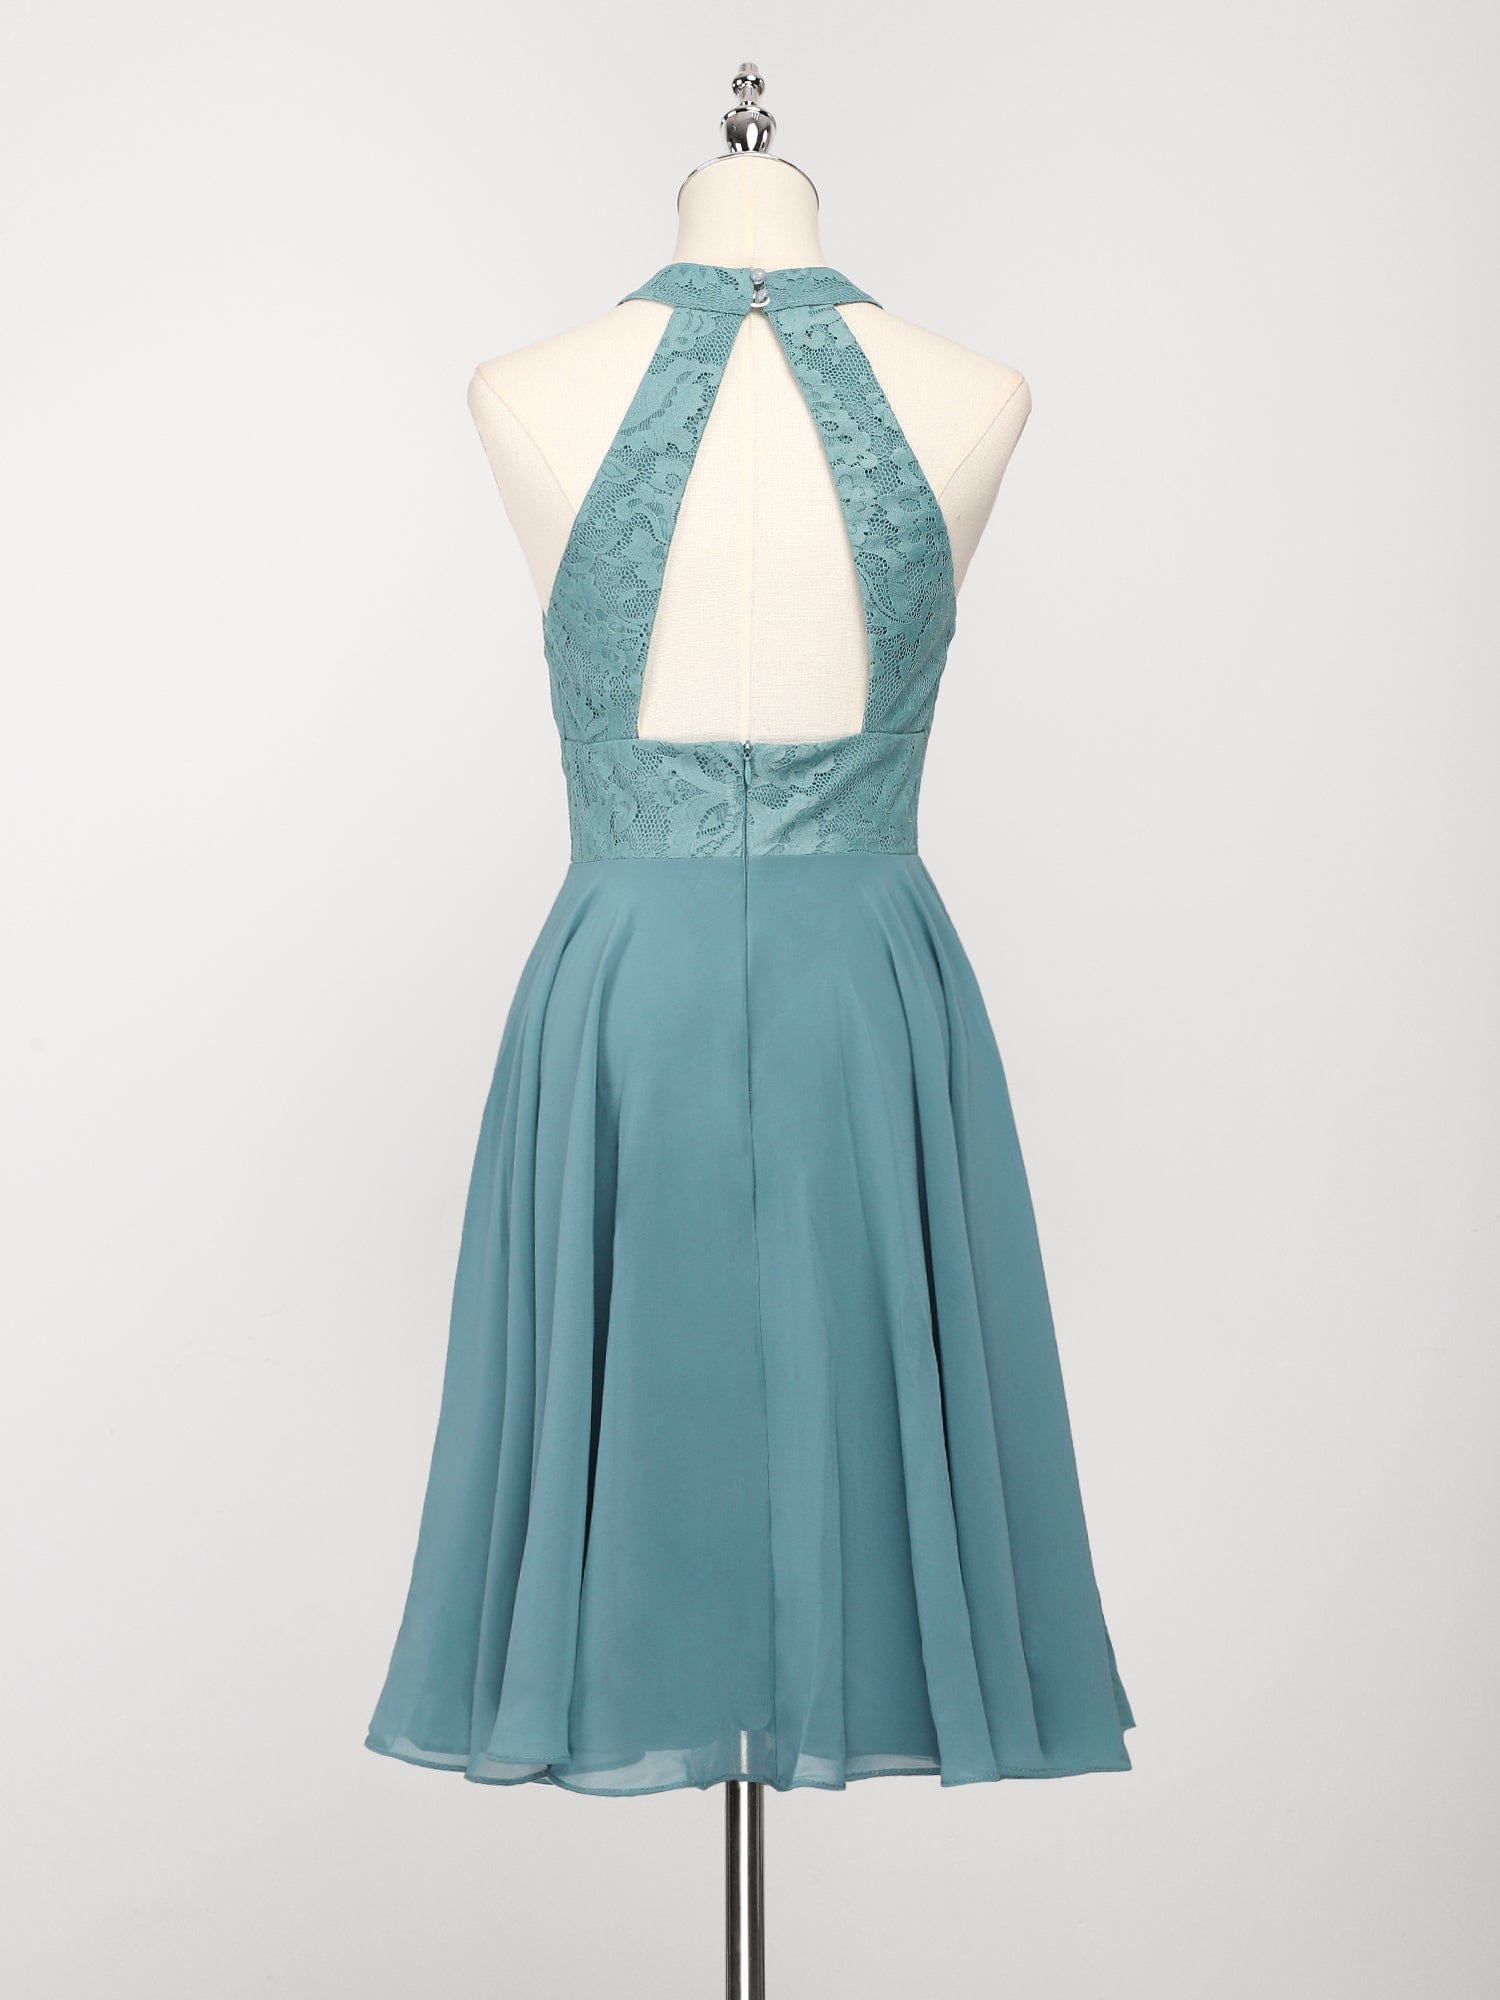 Mini Lace Halter Neck Backless Chiffon Homecoming Dress#color_Dusty Blue